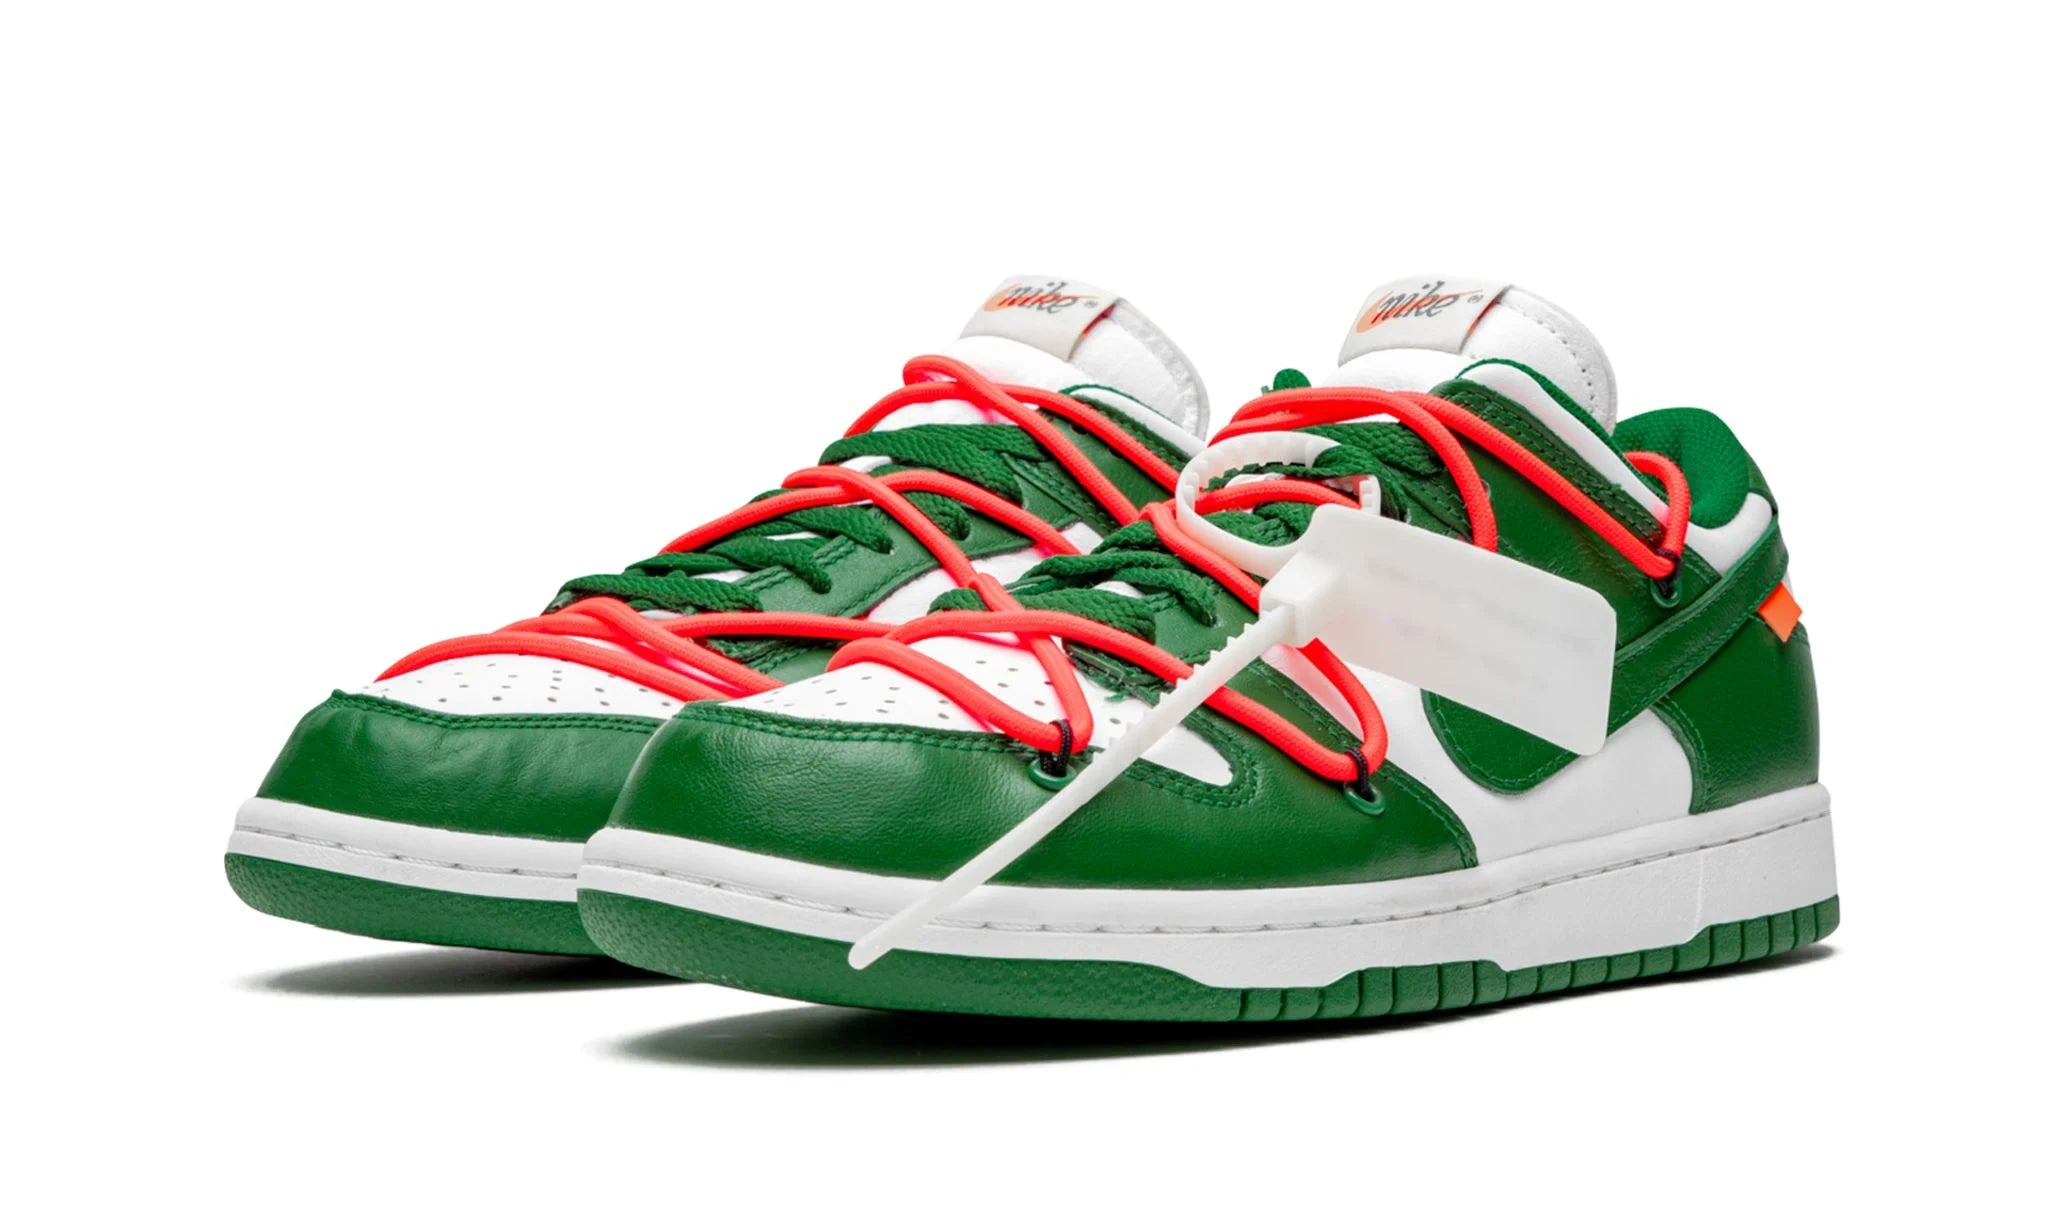 DUNK LOW "Off-White - Pine Green"